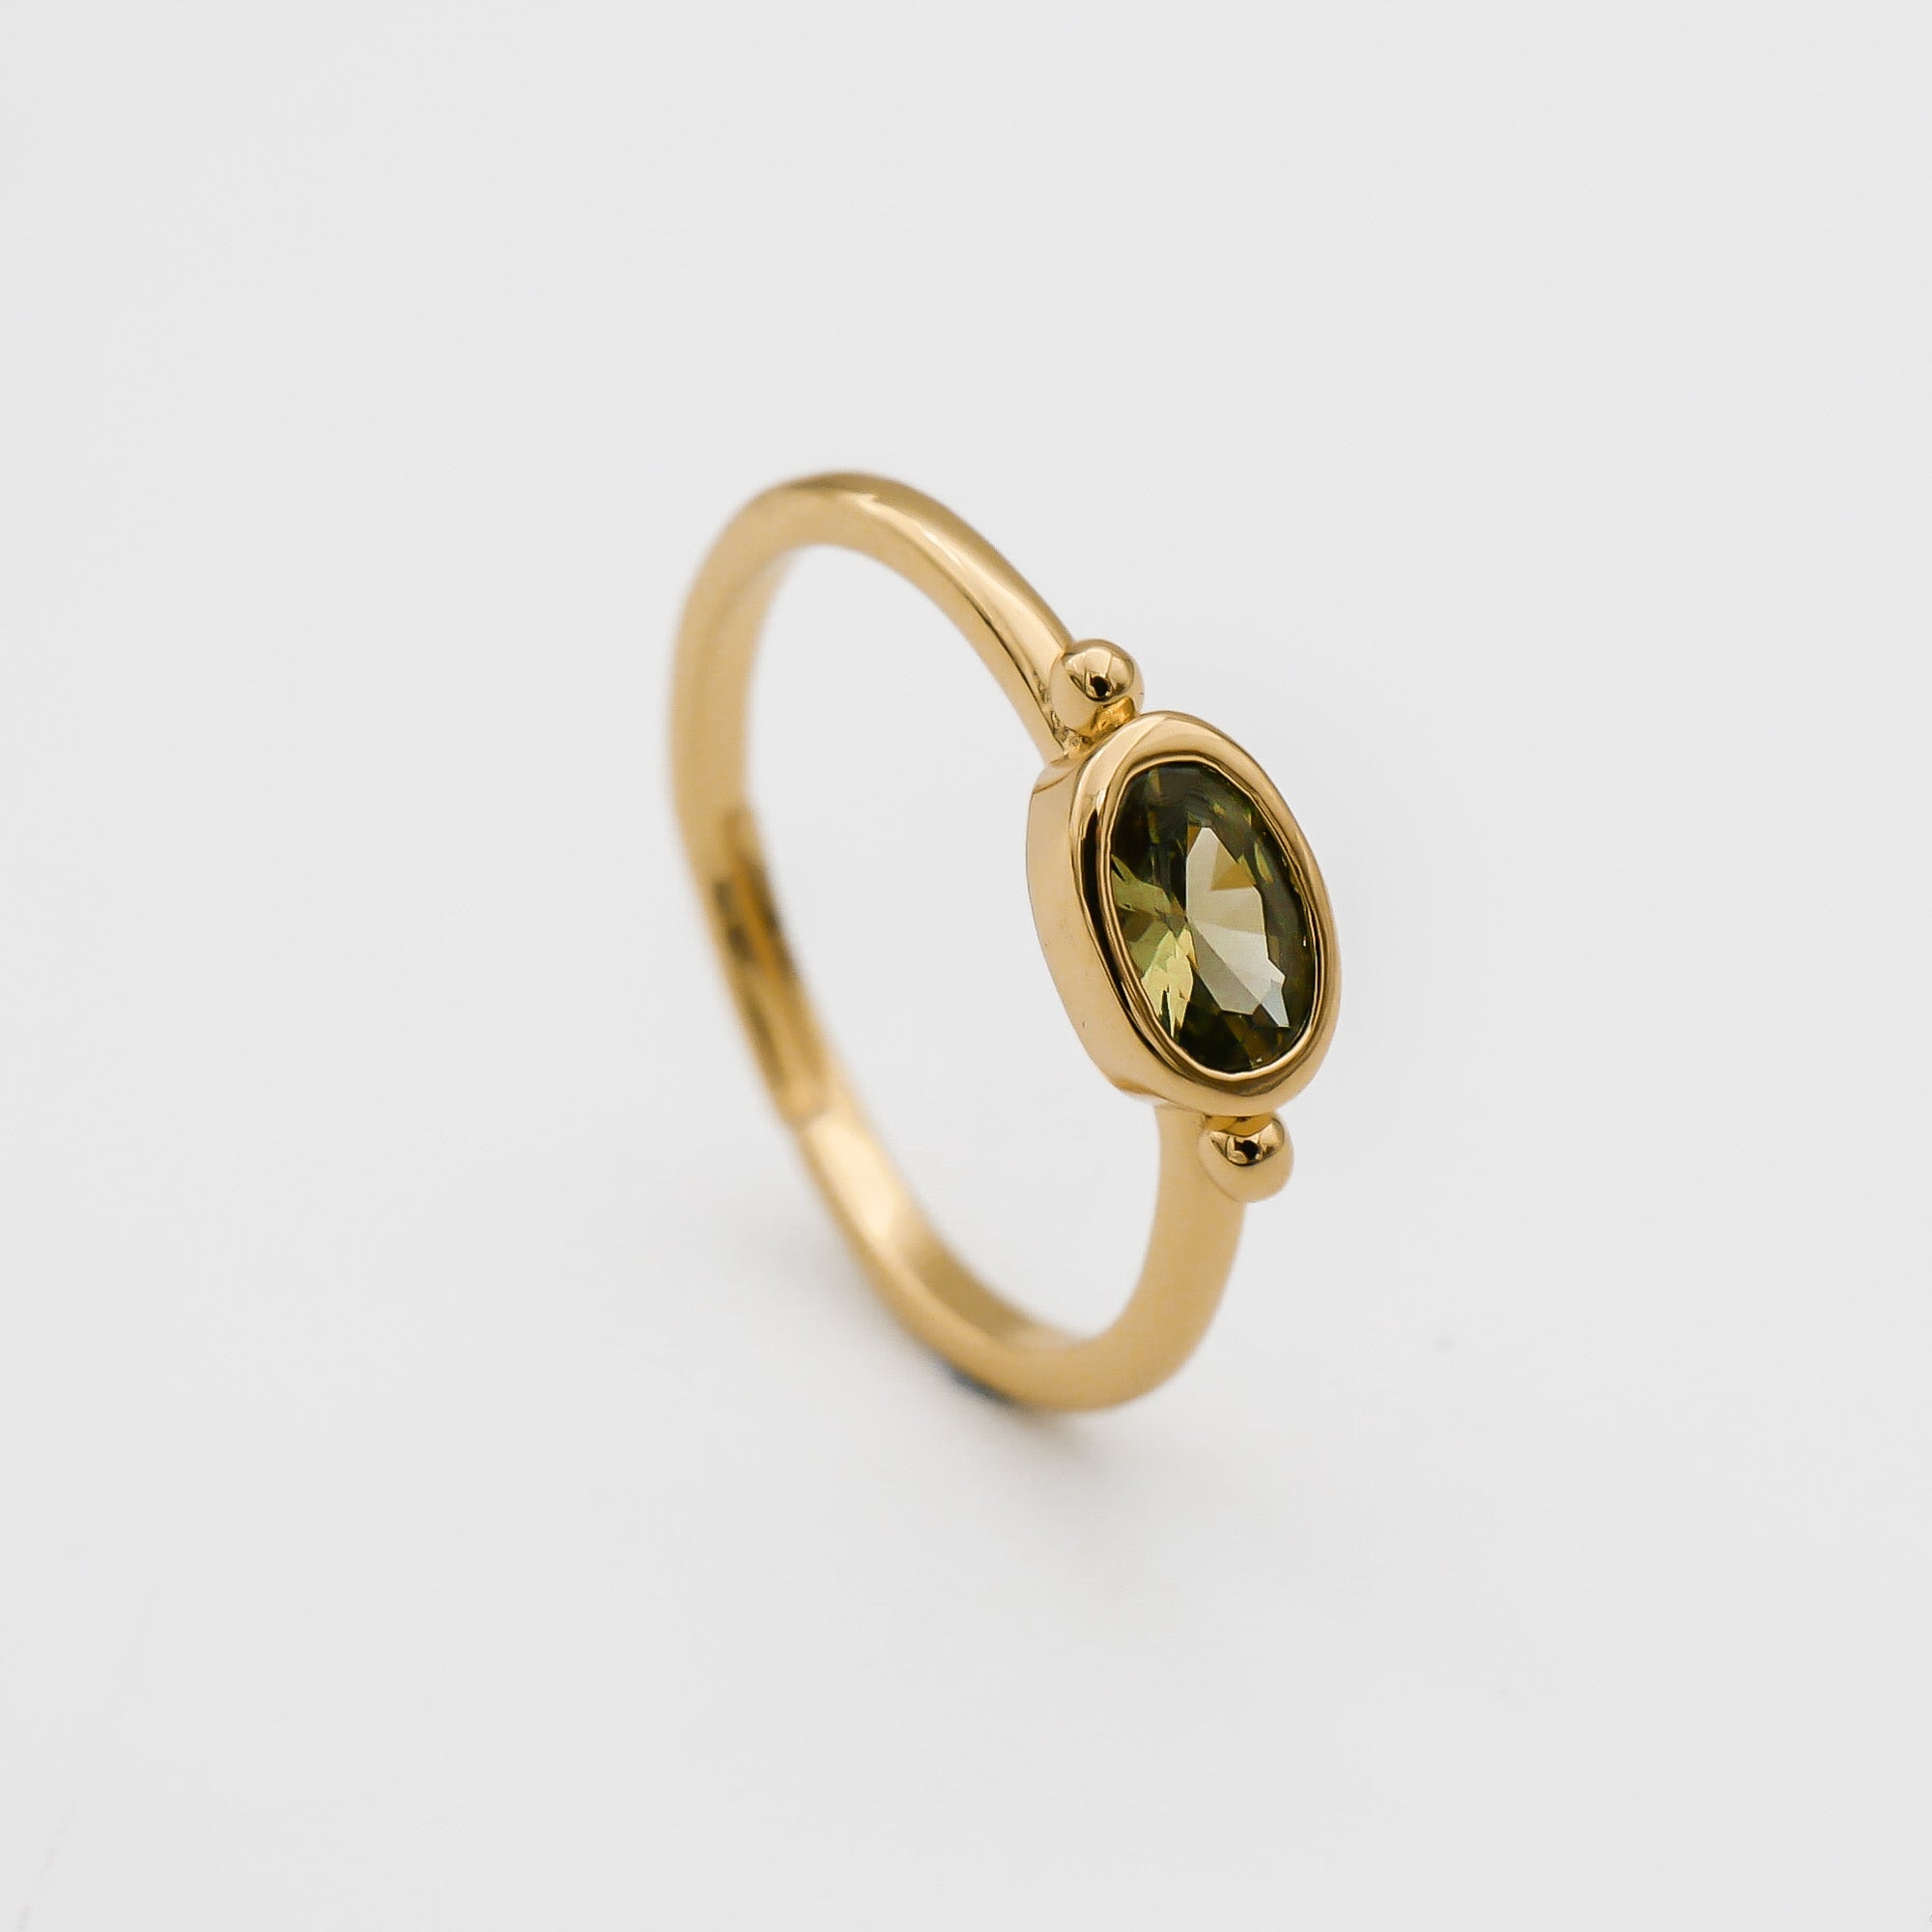 Birthstone ring gold for August with peridot